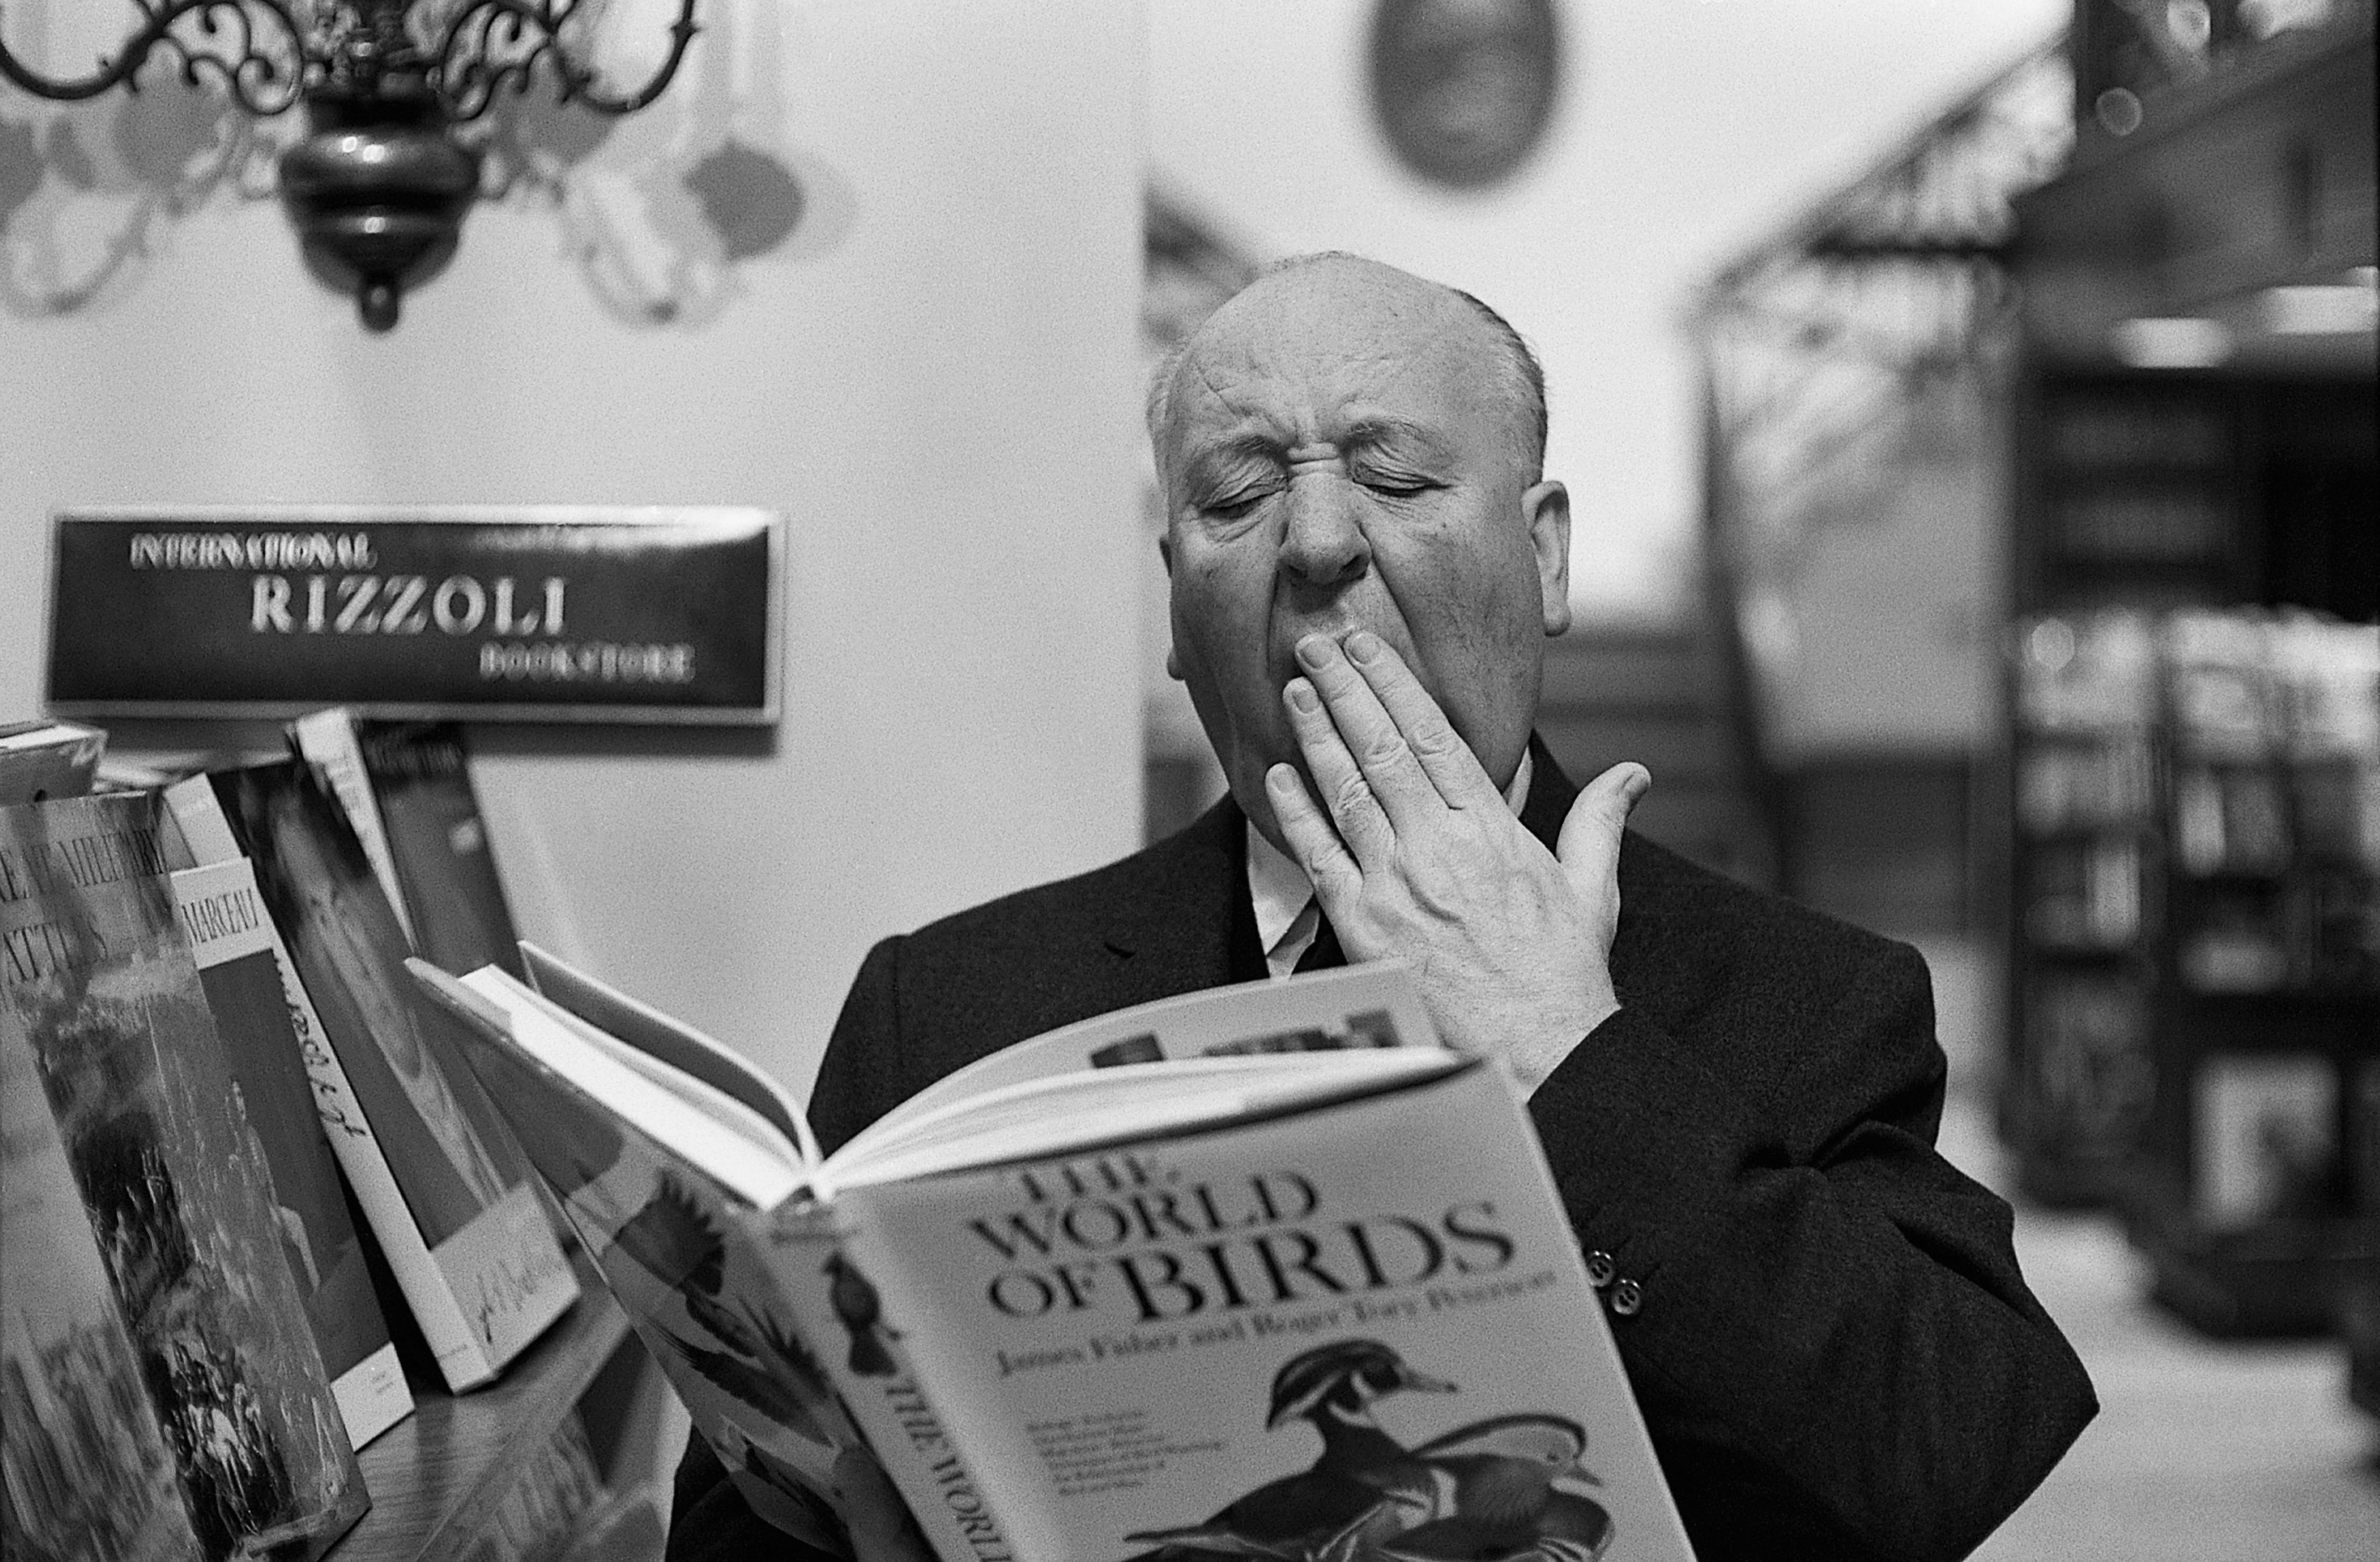 men film directors alfred hitchcock monochrome yawning books suits birds reading Wallpaper